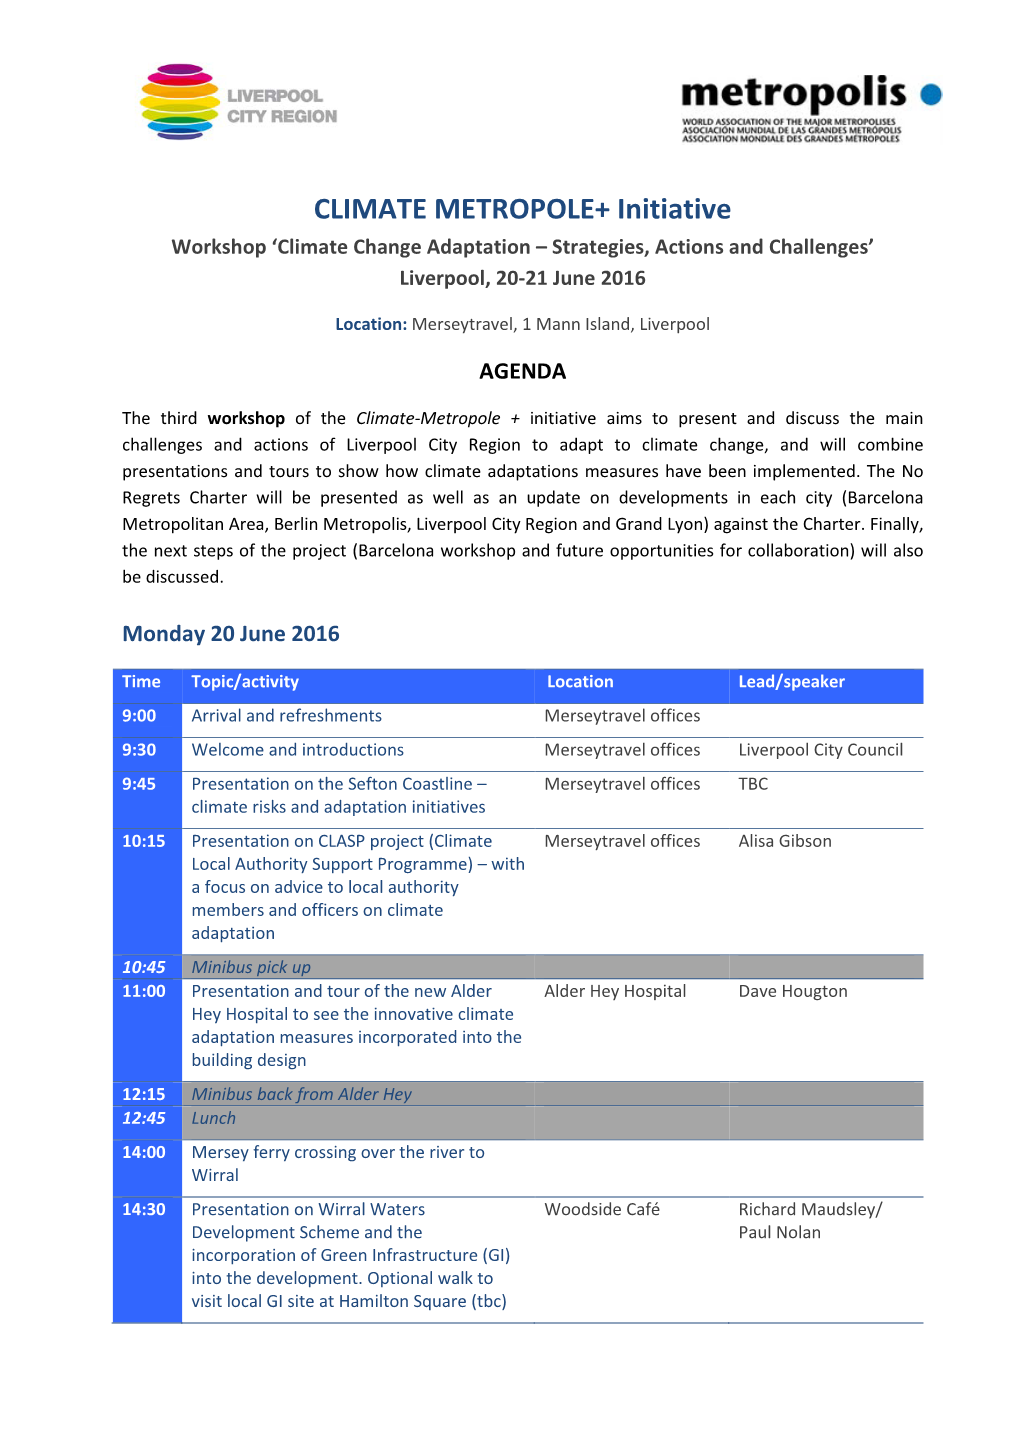 CLIMATE METROPOLE+ Initiative Workshop ‘Climate Change Adaptation – Strategies, Actions and Challenges’ Liverpool, 20-21 June 2016